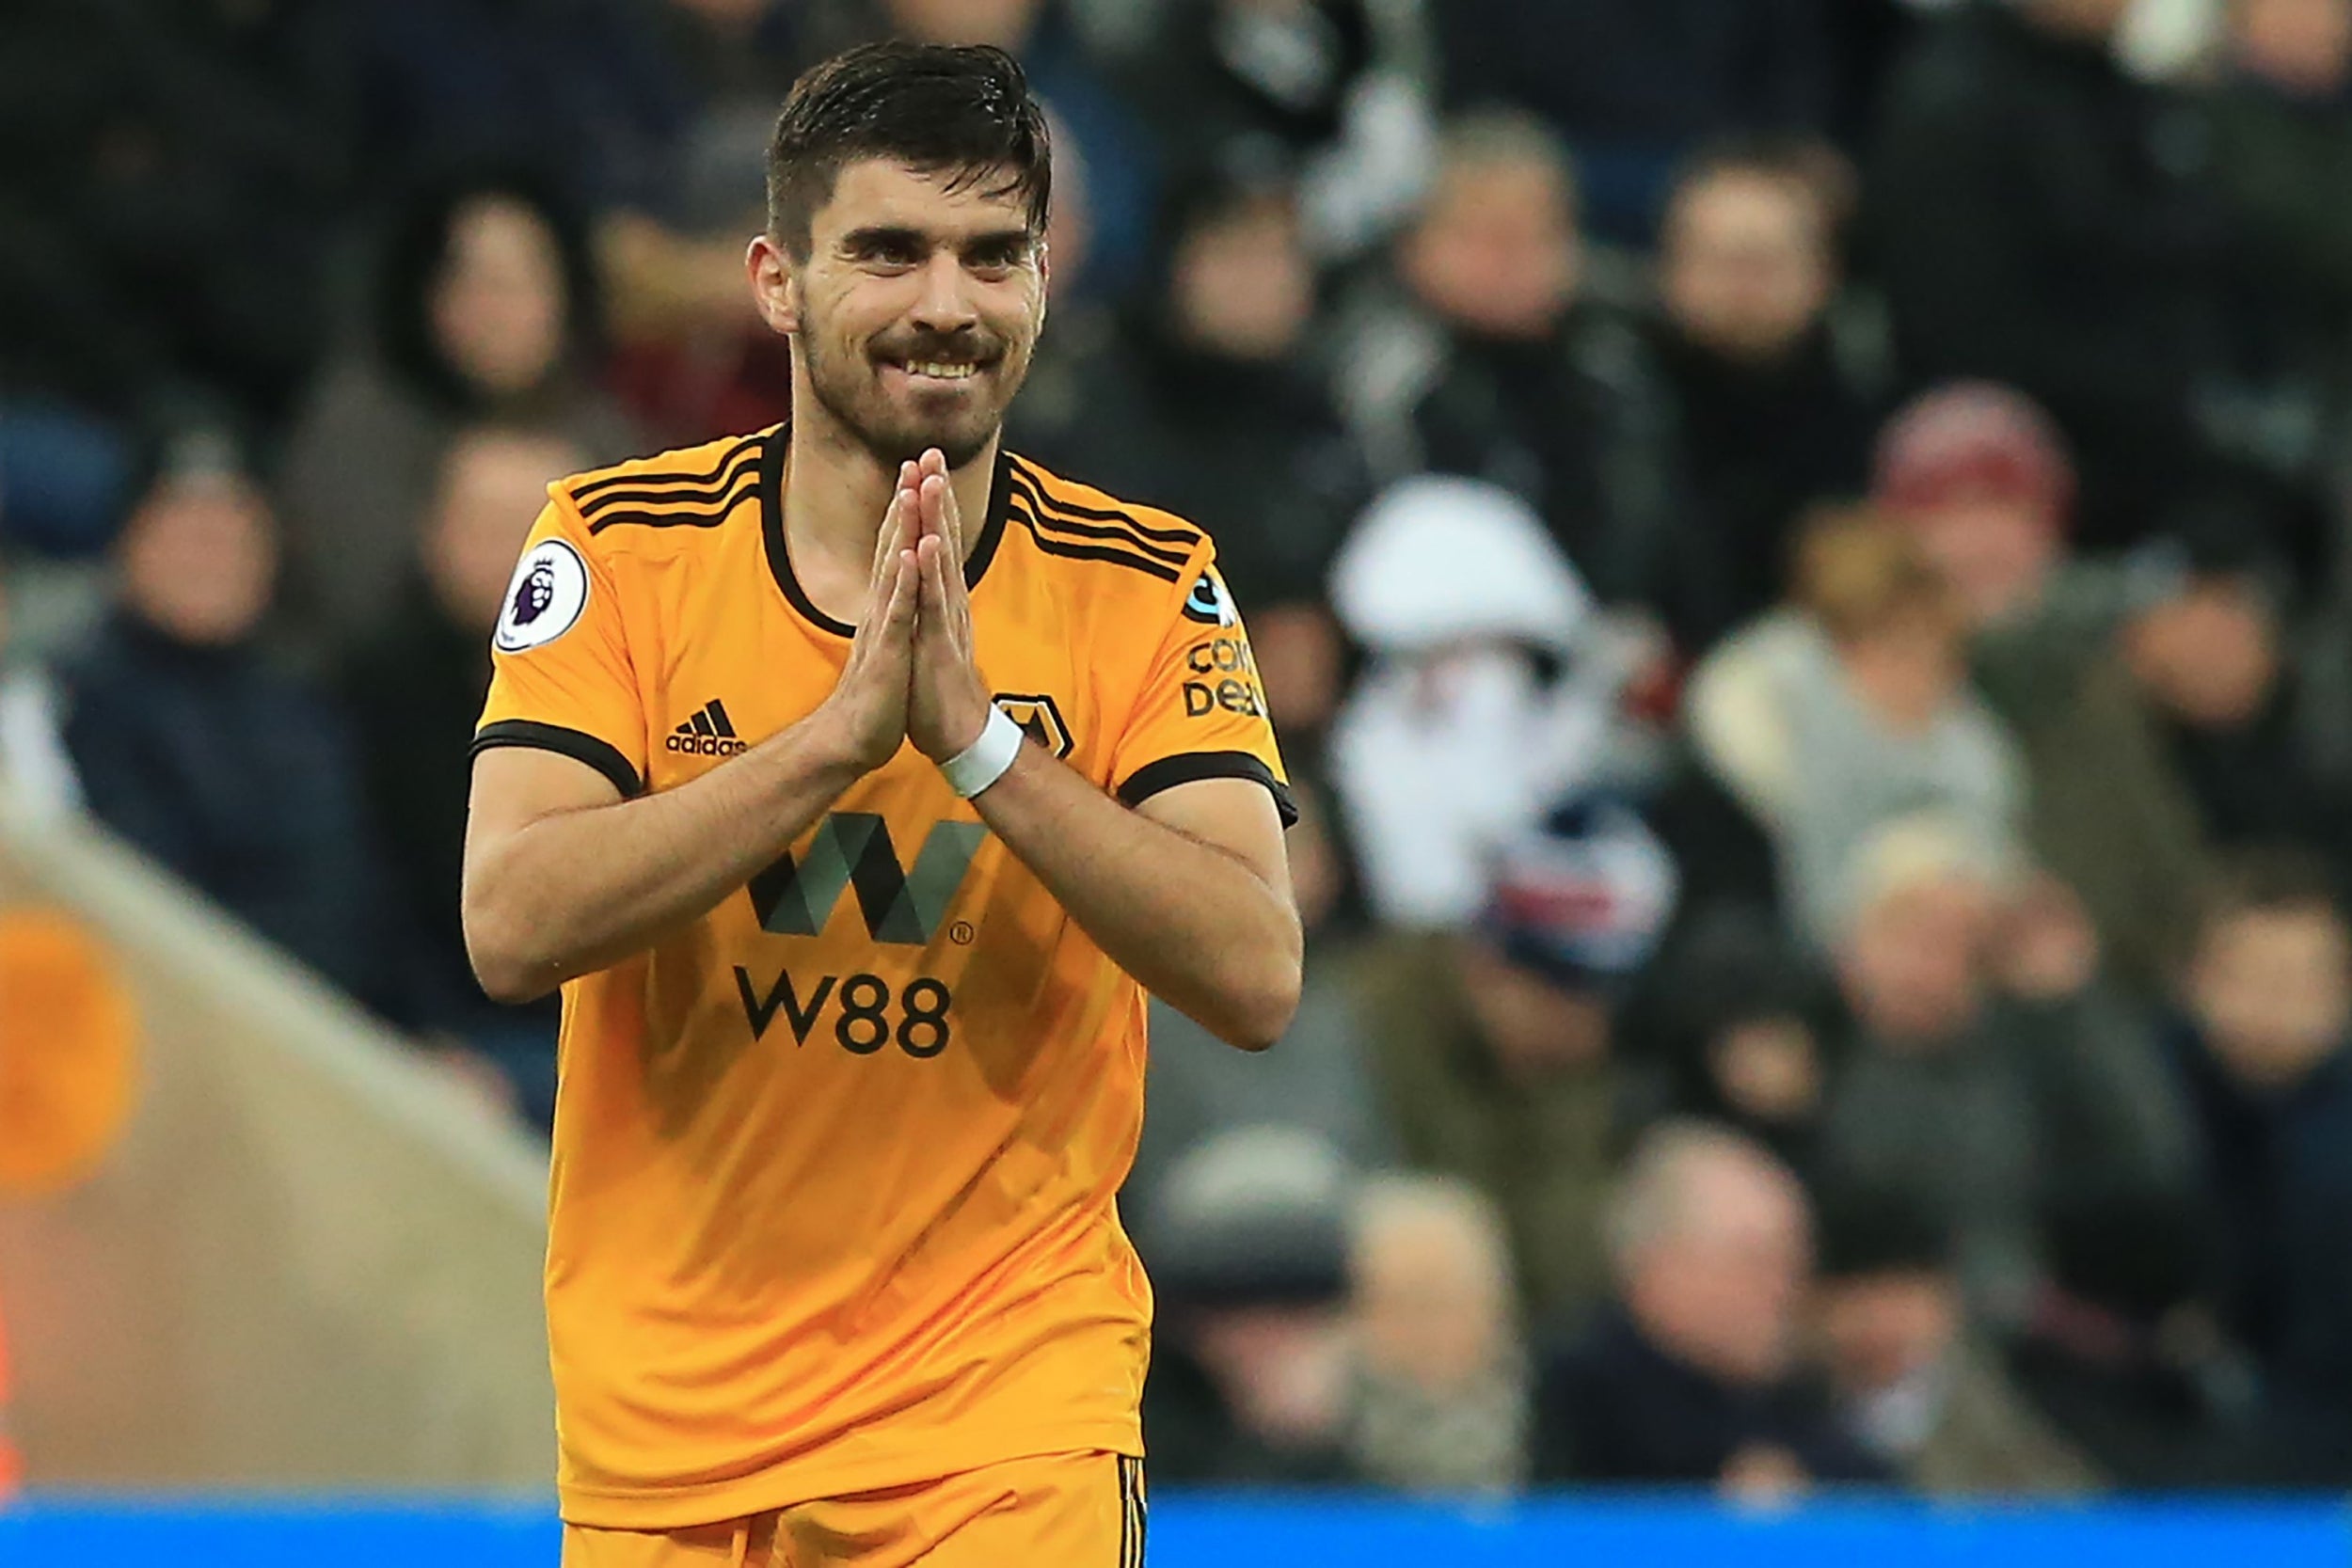 Ruben Neves has been integral to Wolves' success this season (AFP/Getty)